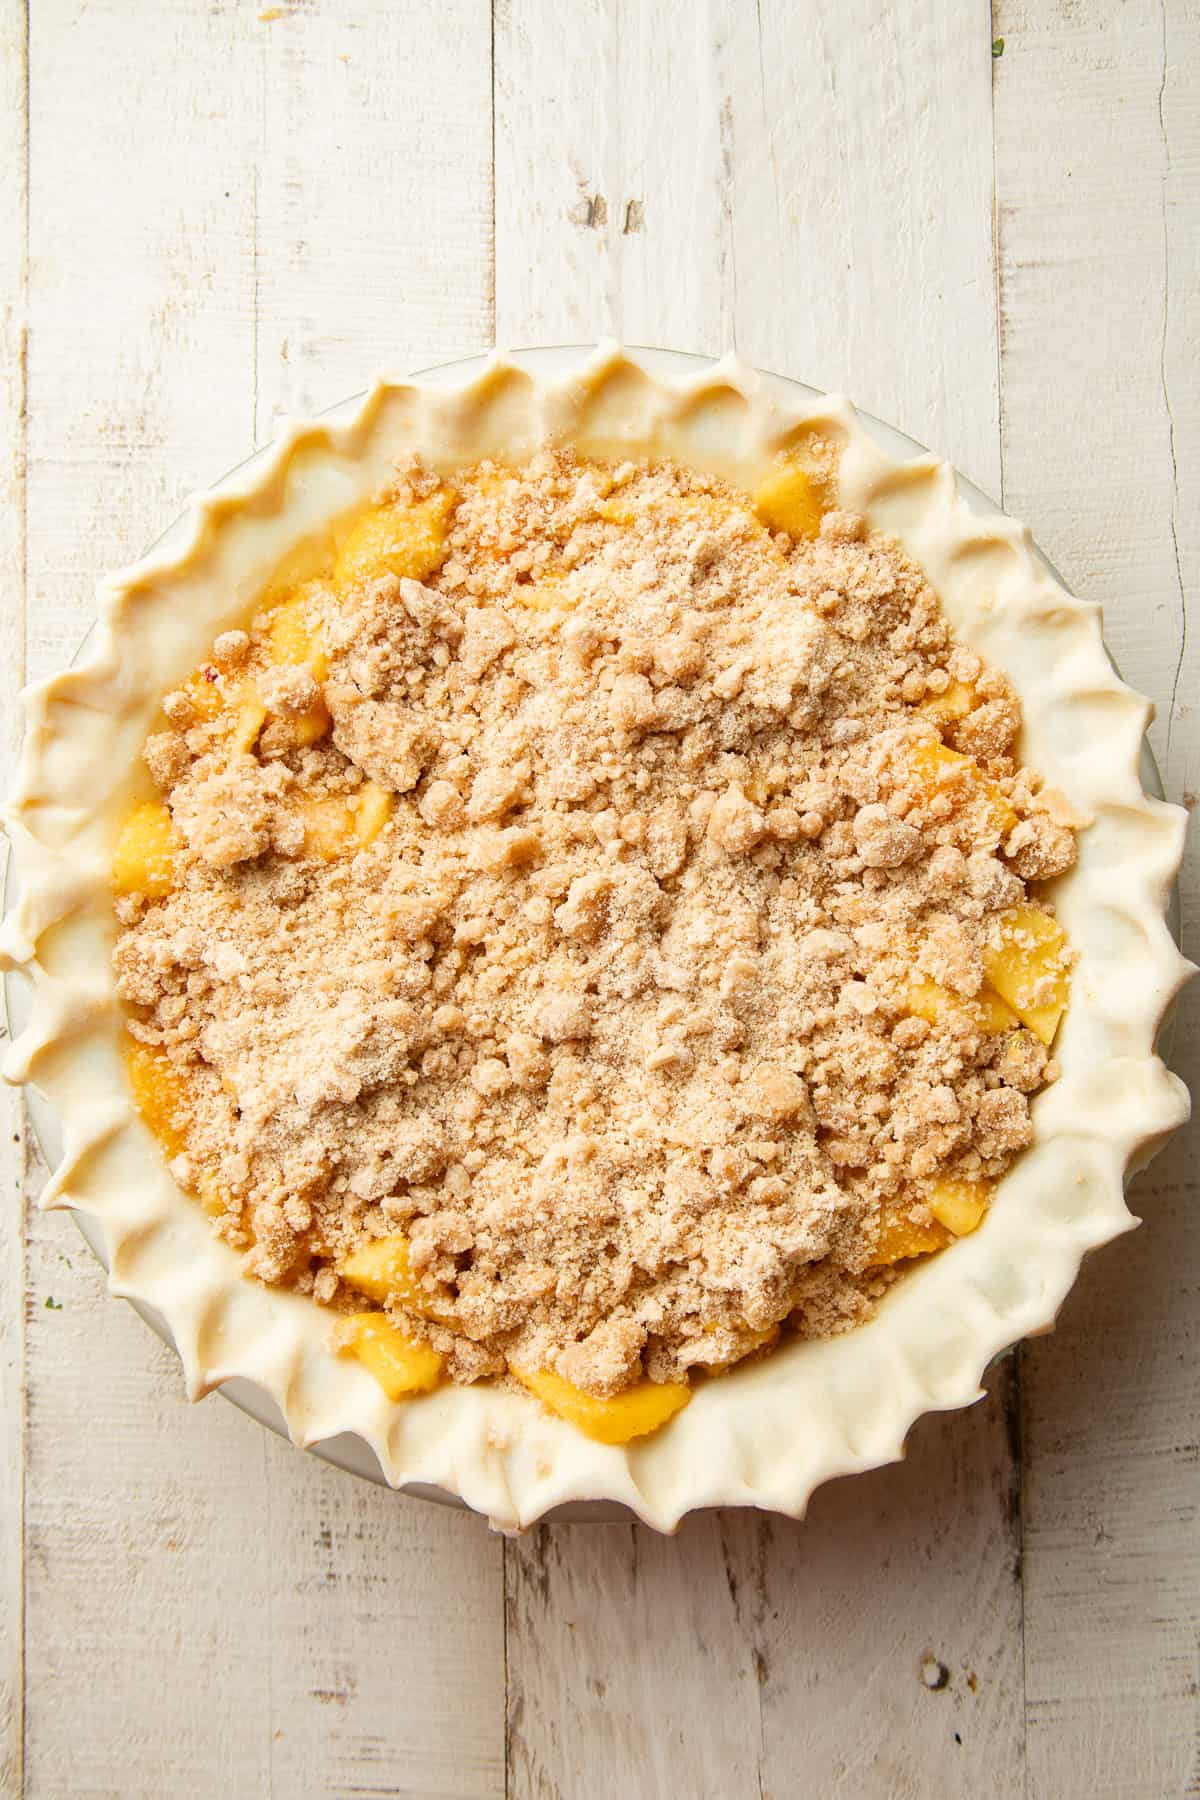 Unbaked Vegan Peach Pie with crumble topping.